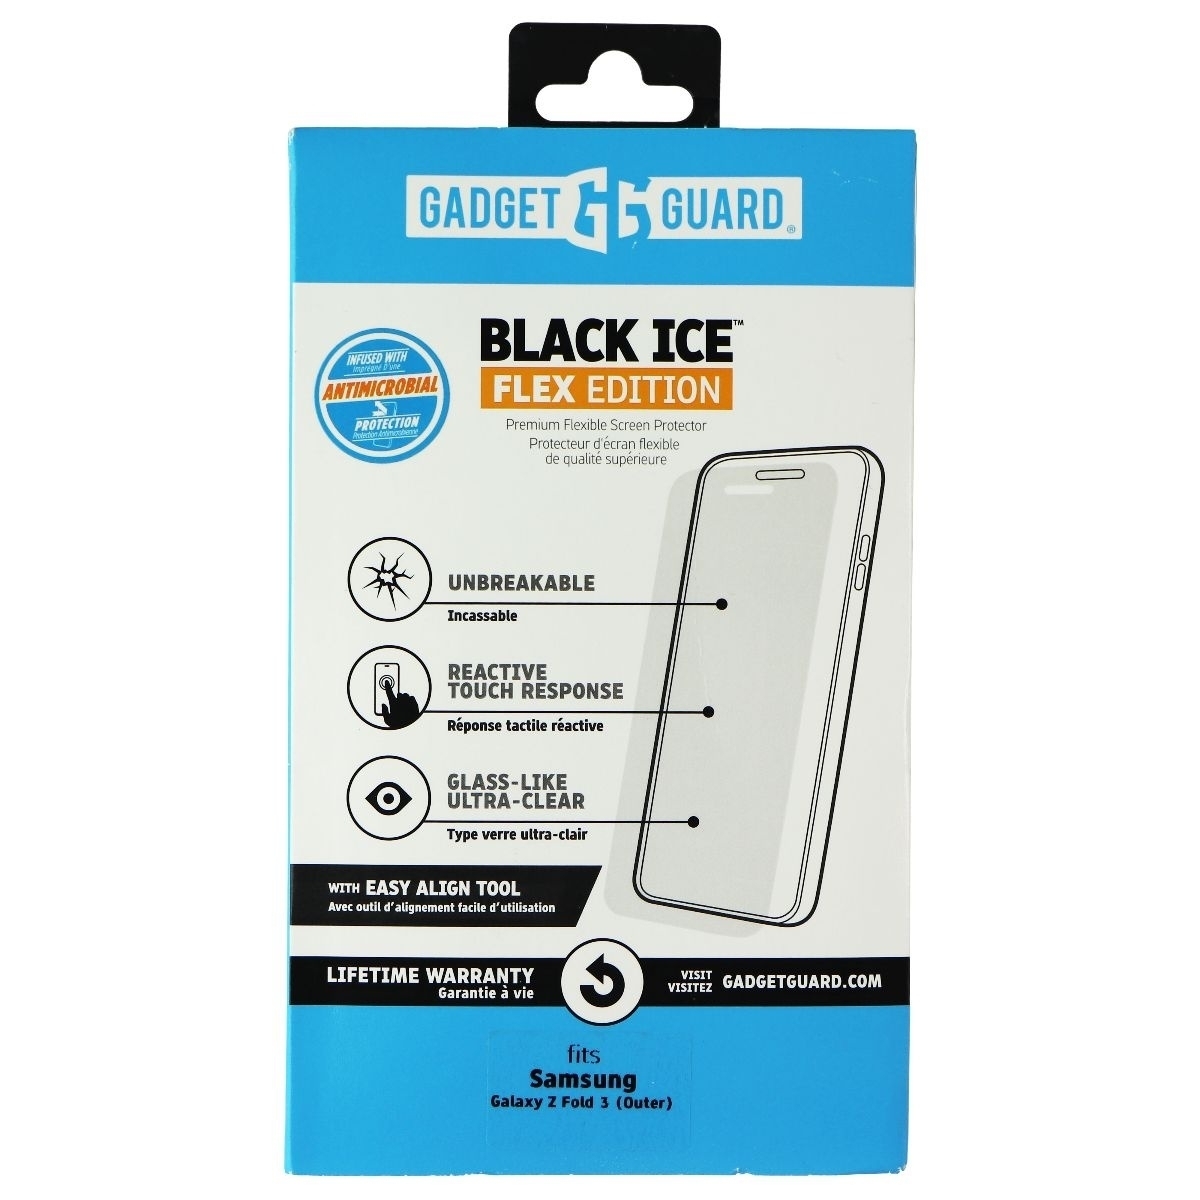 Gadget Guard Black Ice Flex Edition Screen Protector For Galaxy Z Fold3 (Outer)